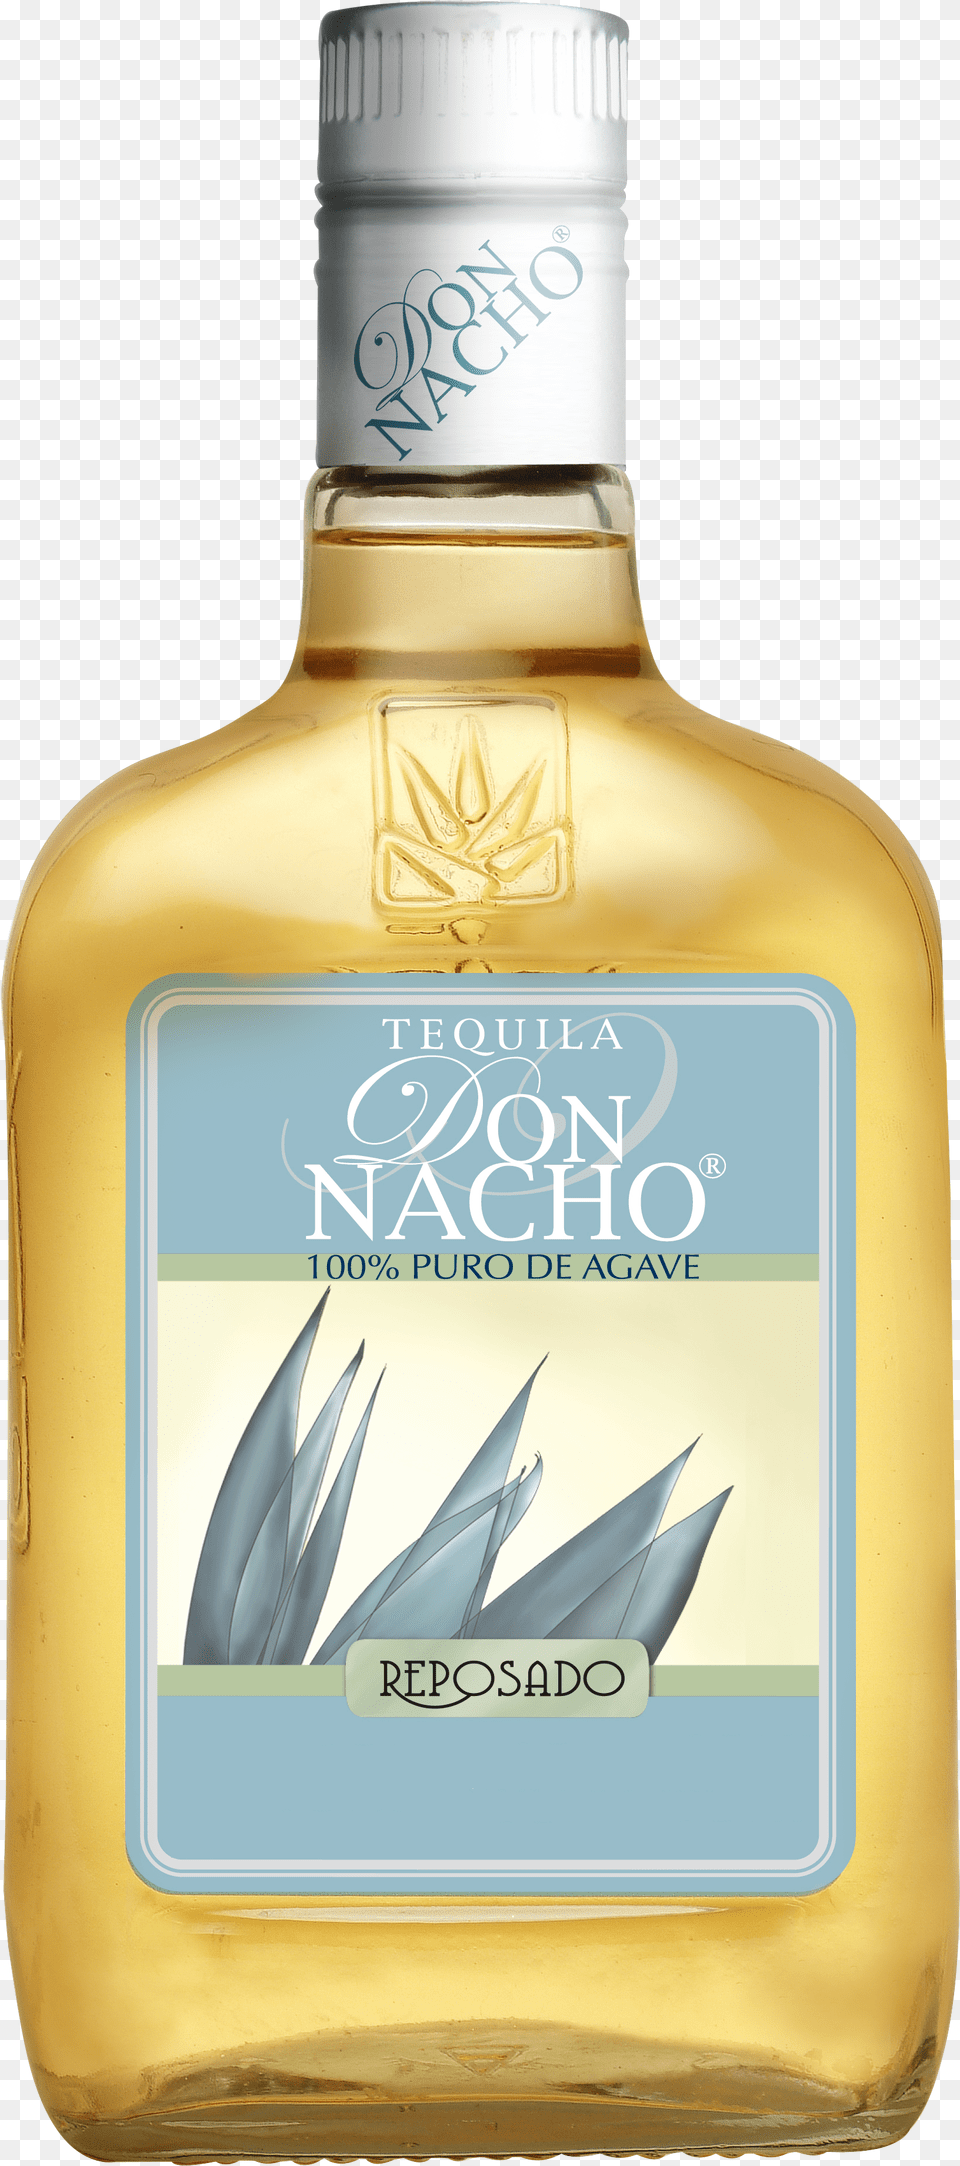 Tequila Don Nacho Free Transparent Png